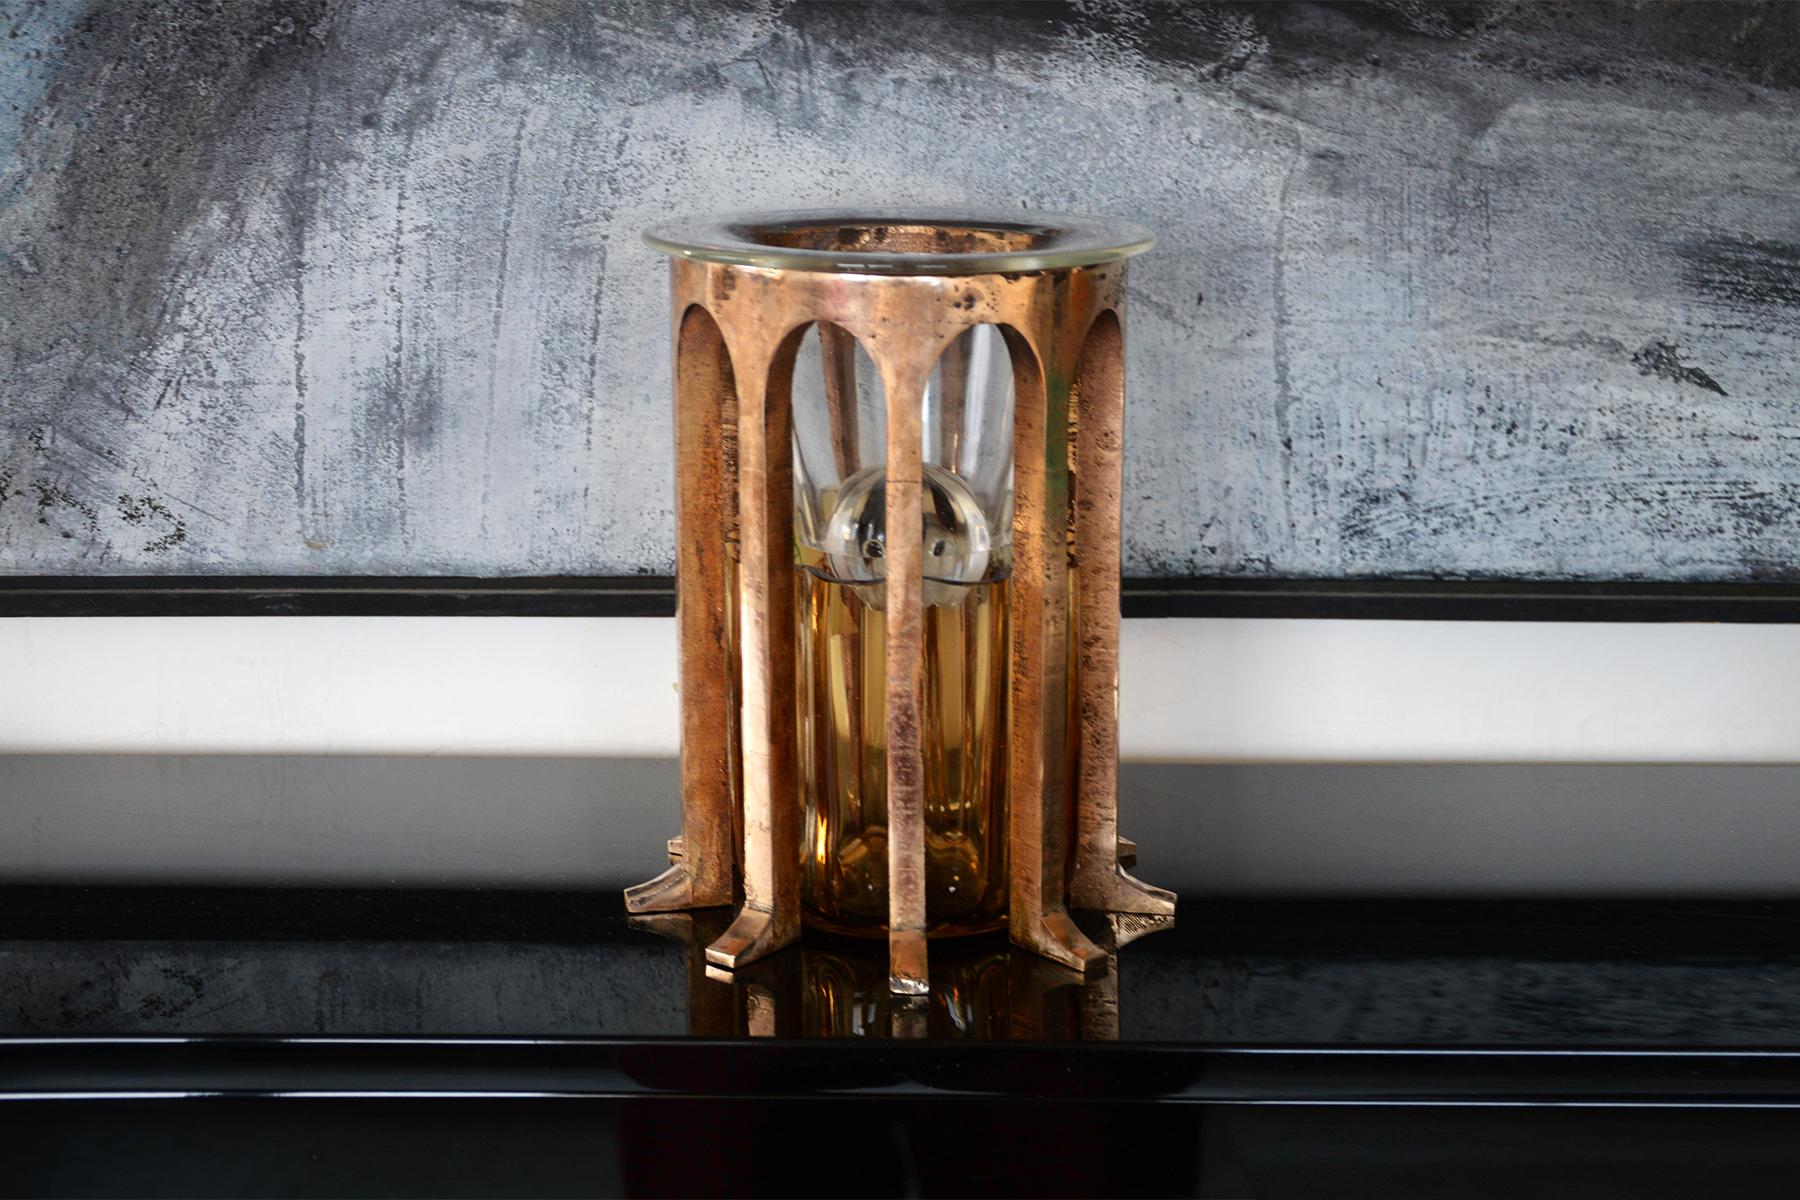 Created in 2022, Abside is the work of collaboration between Fabien Barrero and Atelier George.
The Abside vase is composed of a crown of solid bronze arches. The amber glass part is blown in the structure itself. On the top, there's a colorless